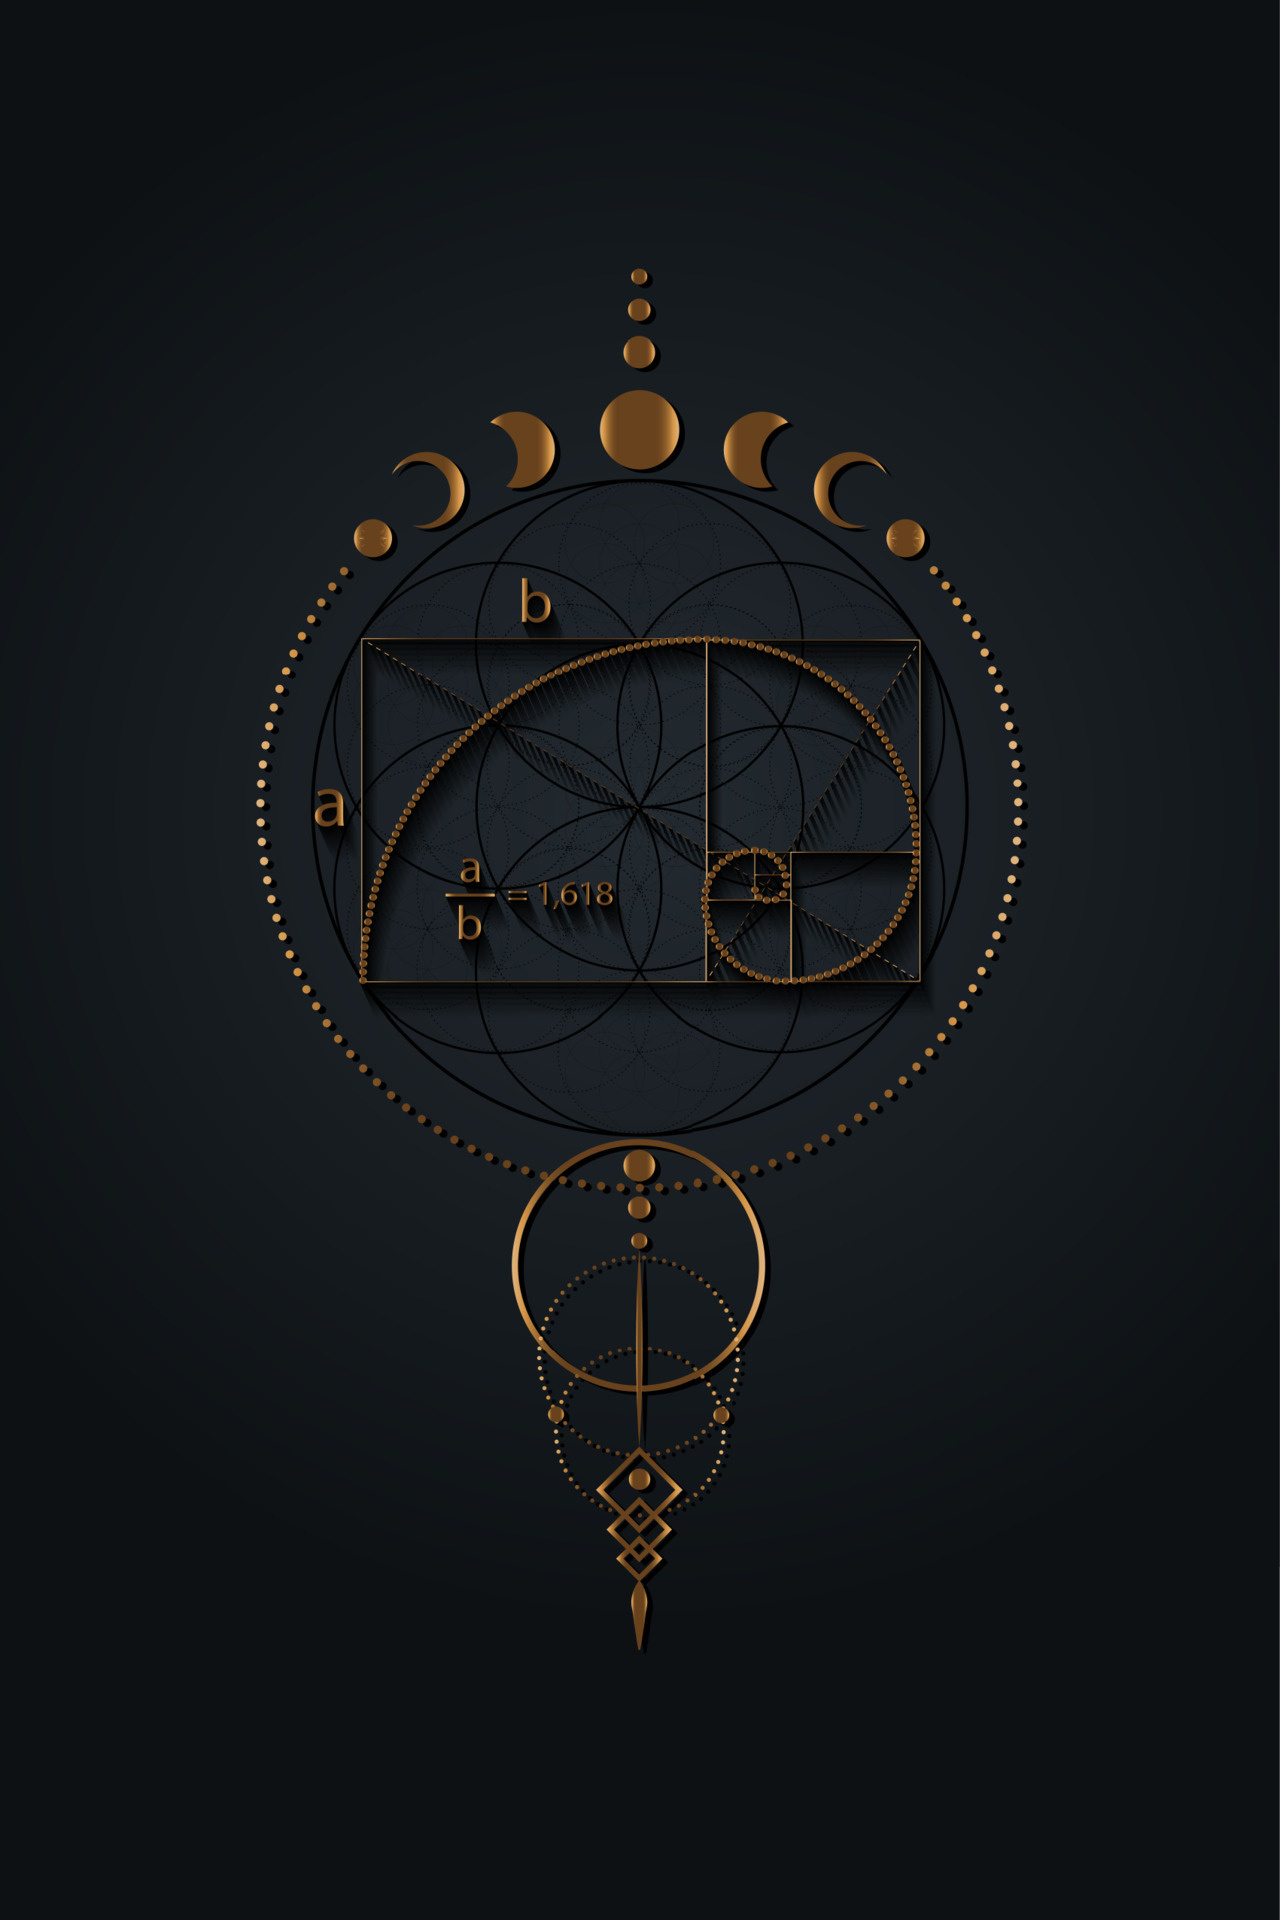 Golden Ratio: Fibonacci sequence, Numbers, Mystical flower of life and moon phases, Sacred geometry, Divine proportion, Wicca, Energy circles, Vector art. 1280x1920 HD Background.